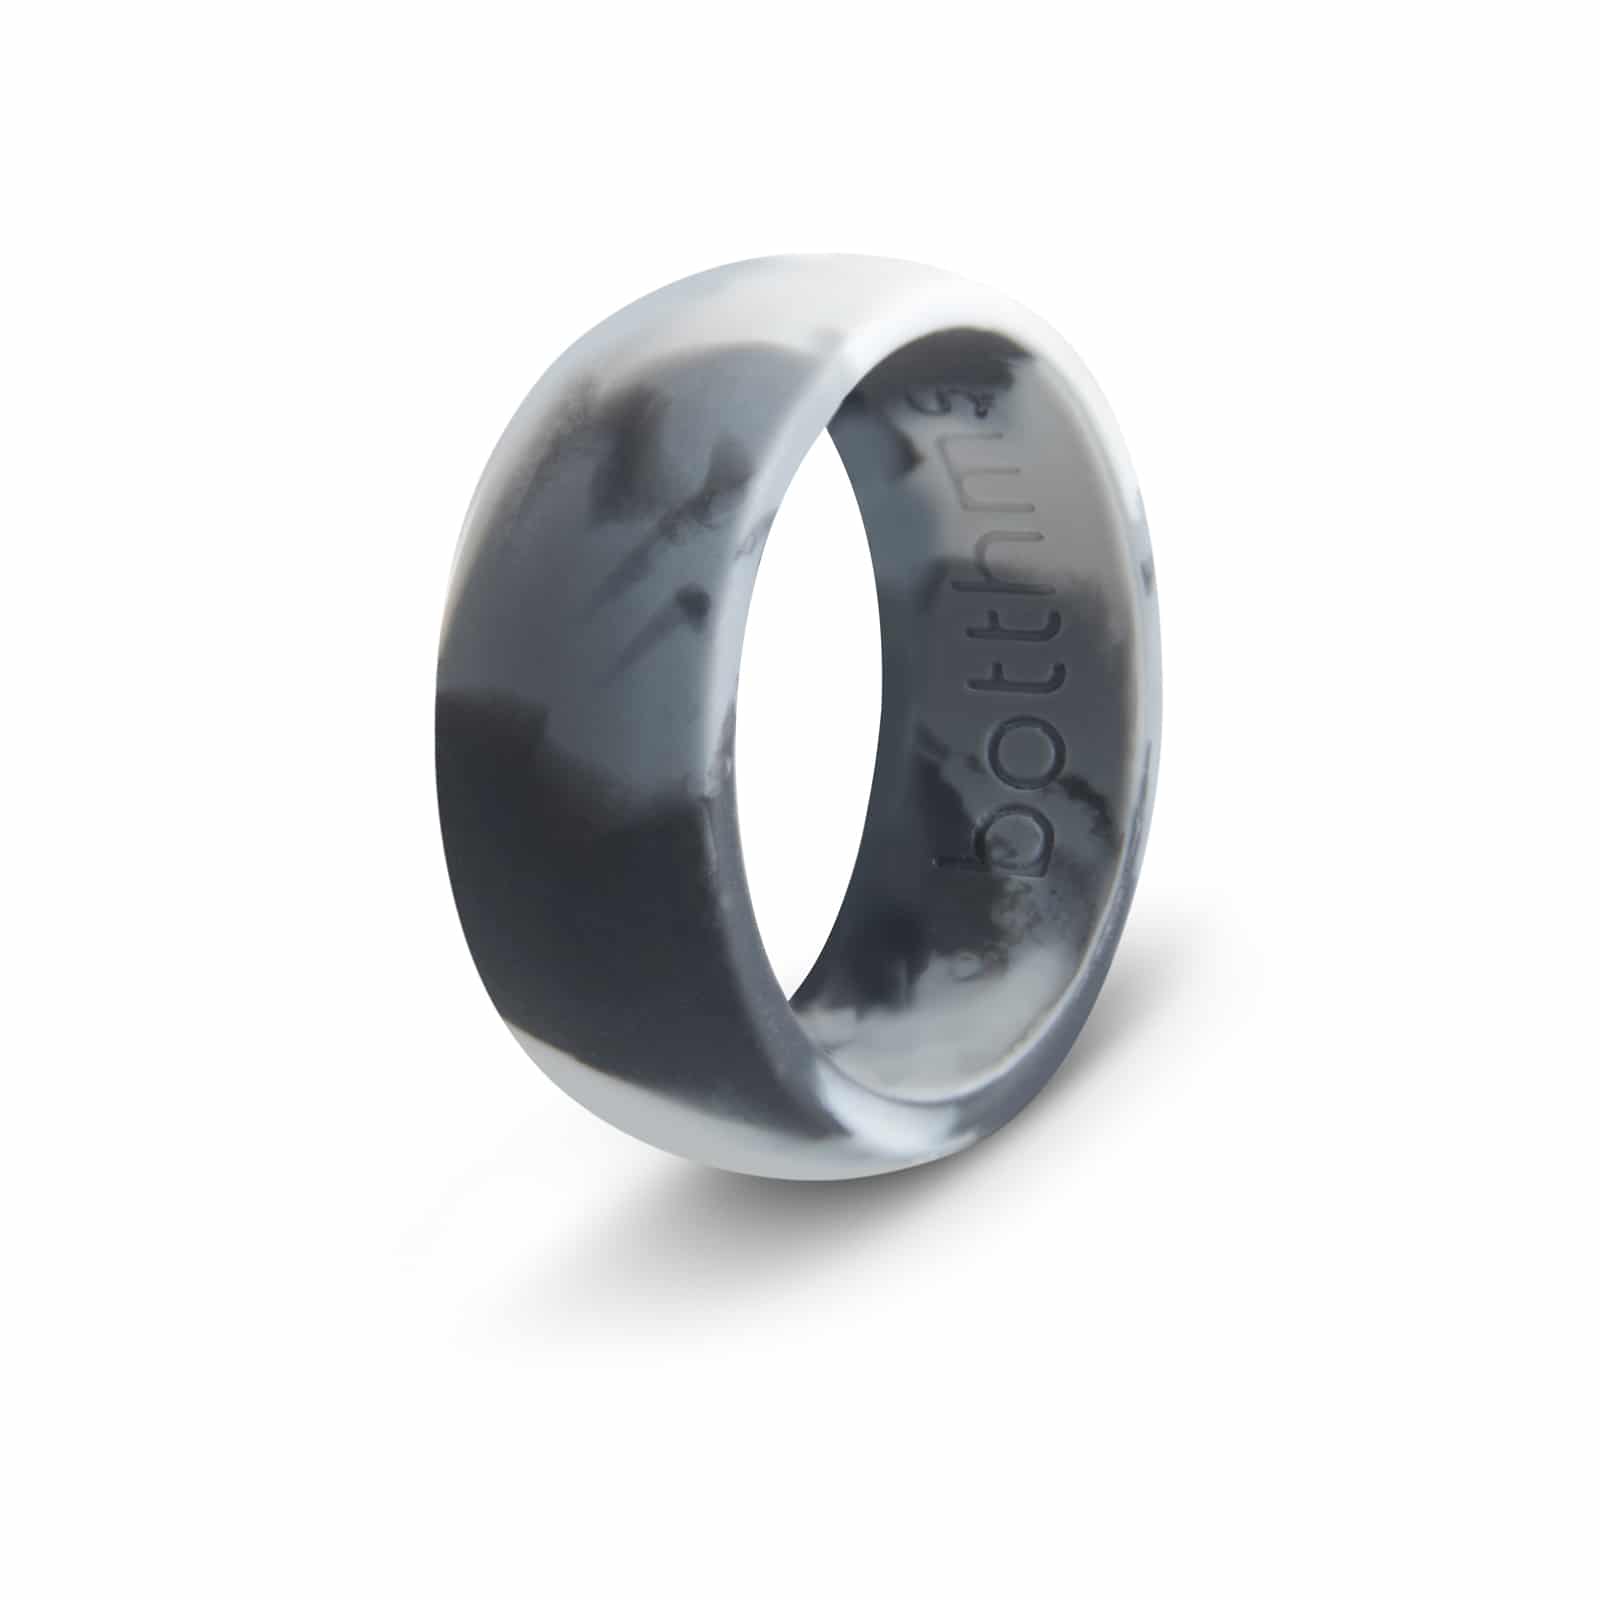 products/Botthms-Ring-Grey-Camo.jpg